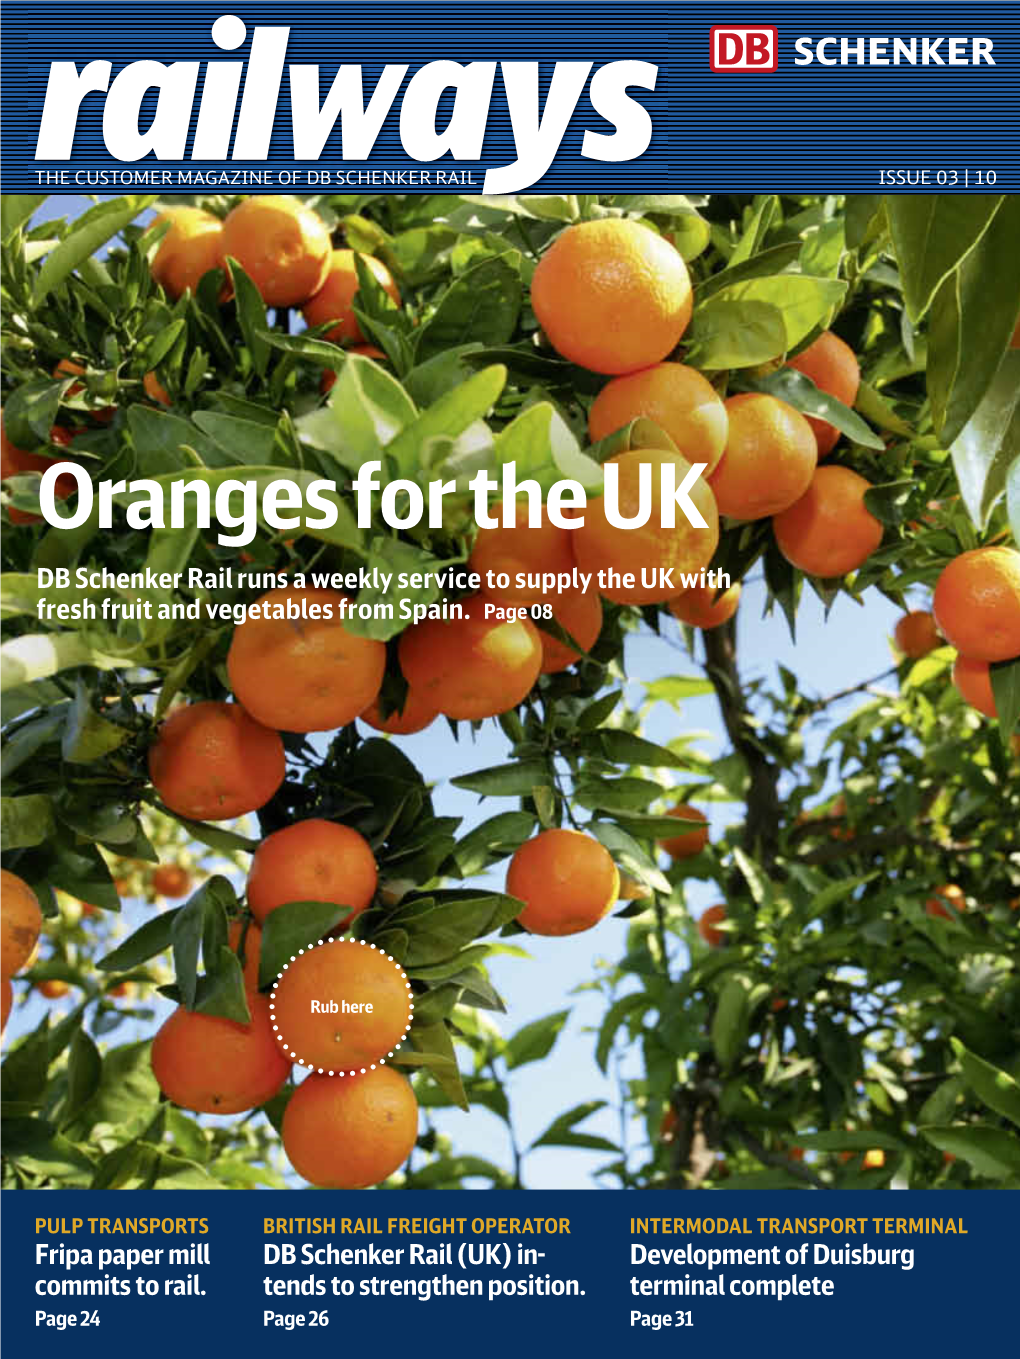 Oranges for the UK DB Schenker Rail Runs a Weekly Service to Supply the UK with Fresh Fruit and Vegetables from Spain